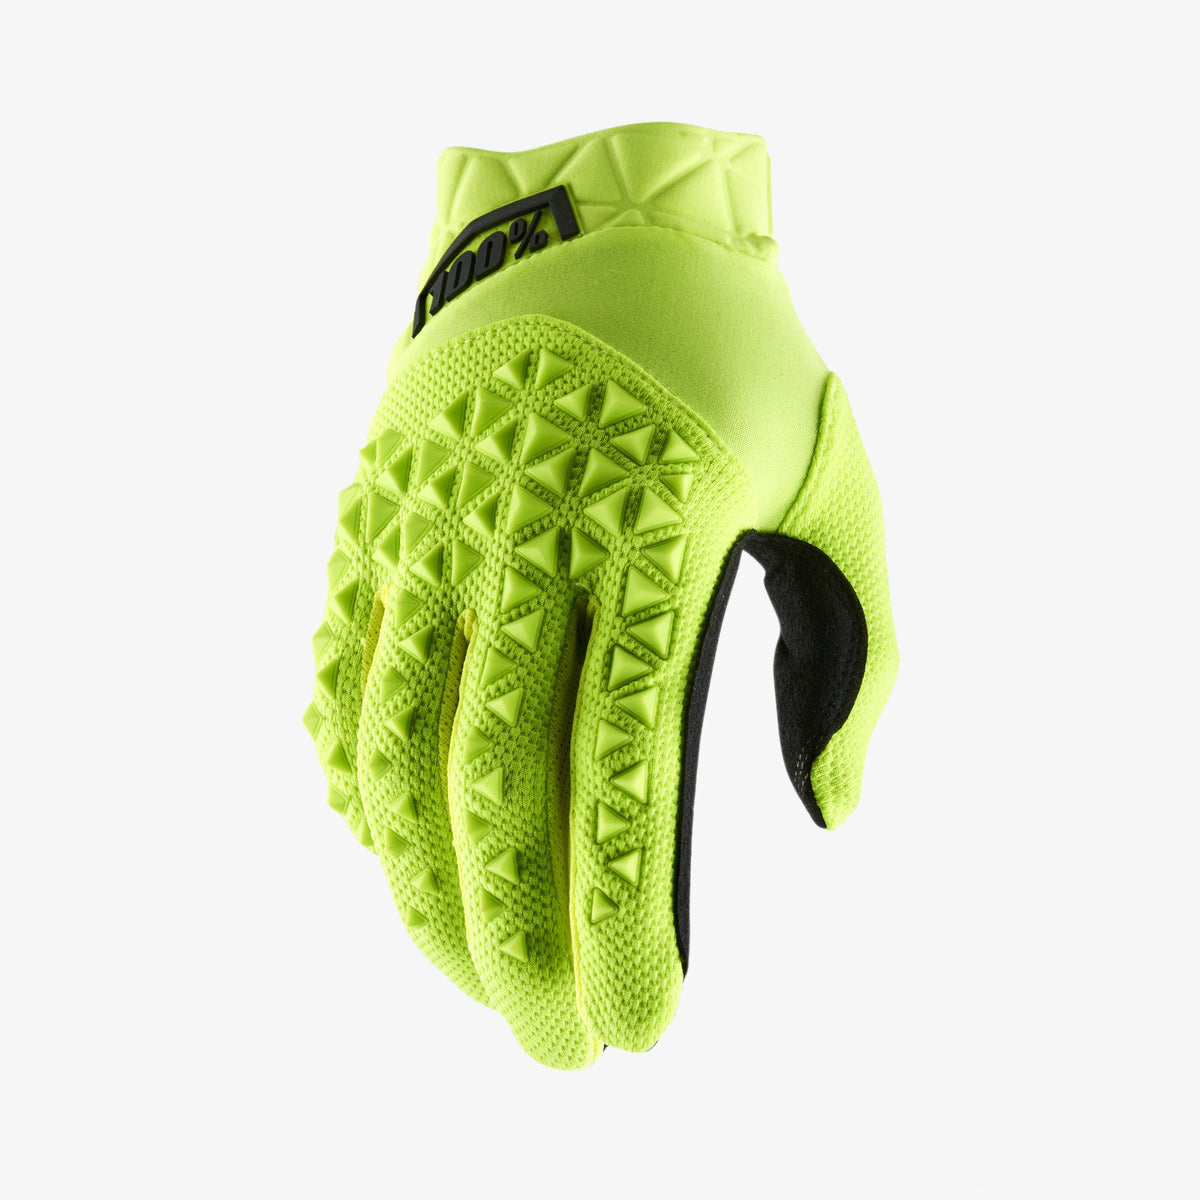 AIRMATIC Glove - Fluo Yellow/Black